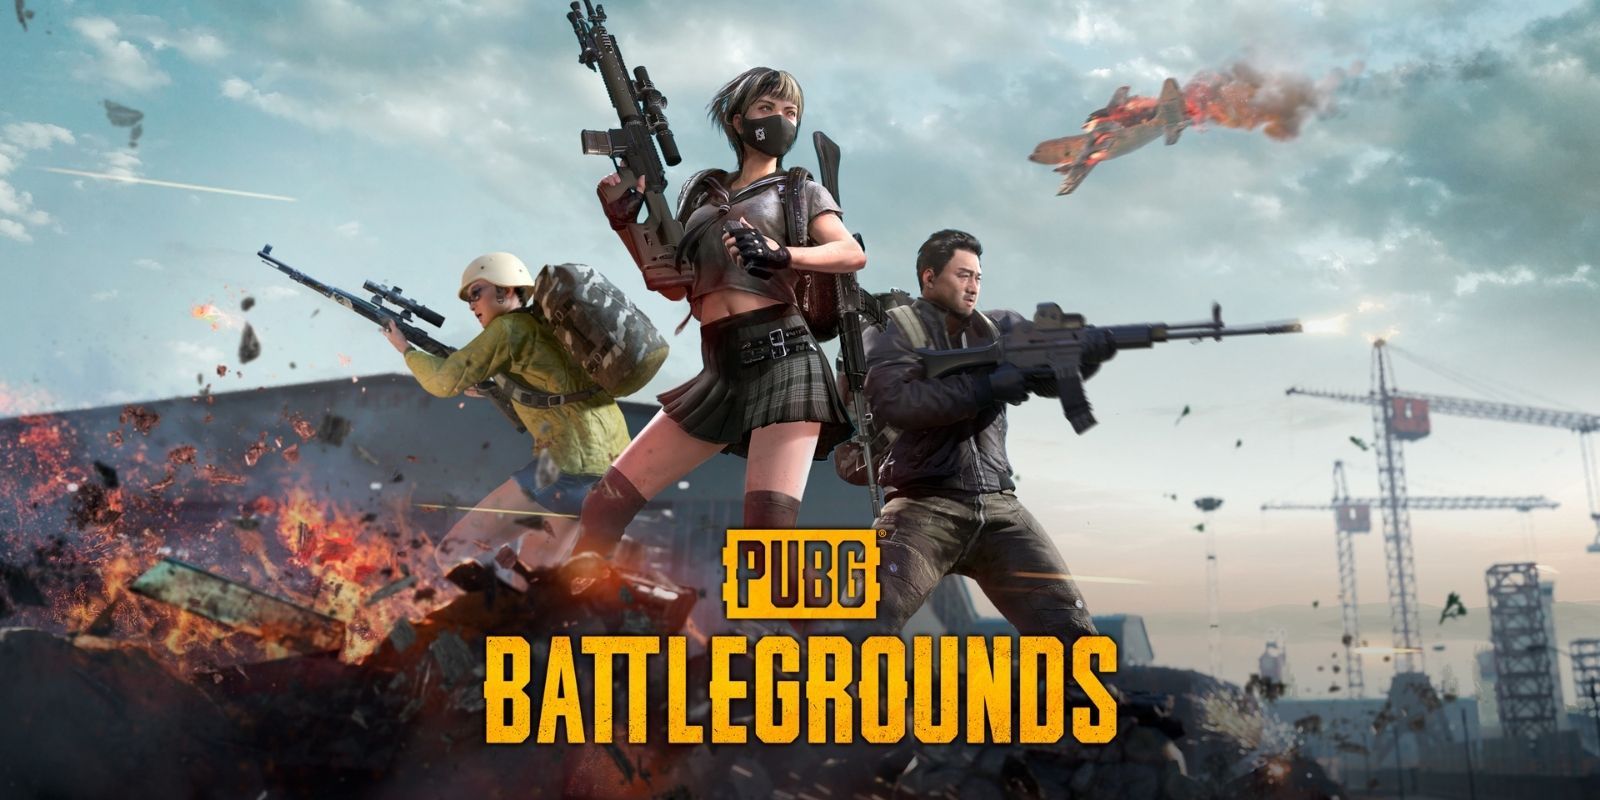 An explosive poster for PUBG, featuring several fighters in the heat of battle